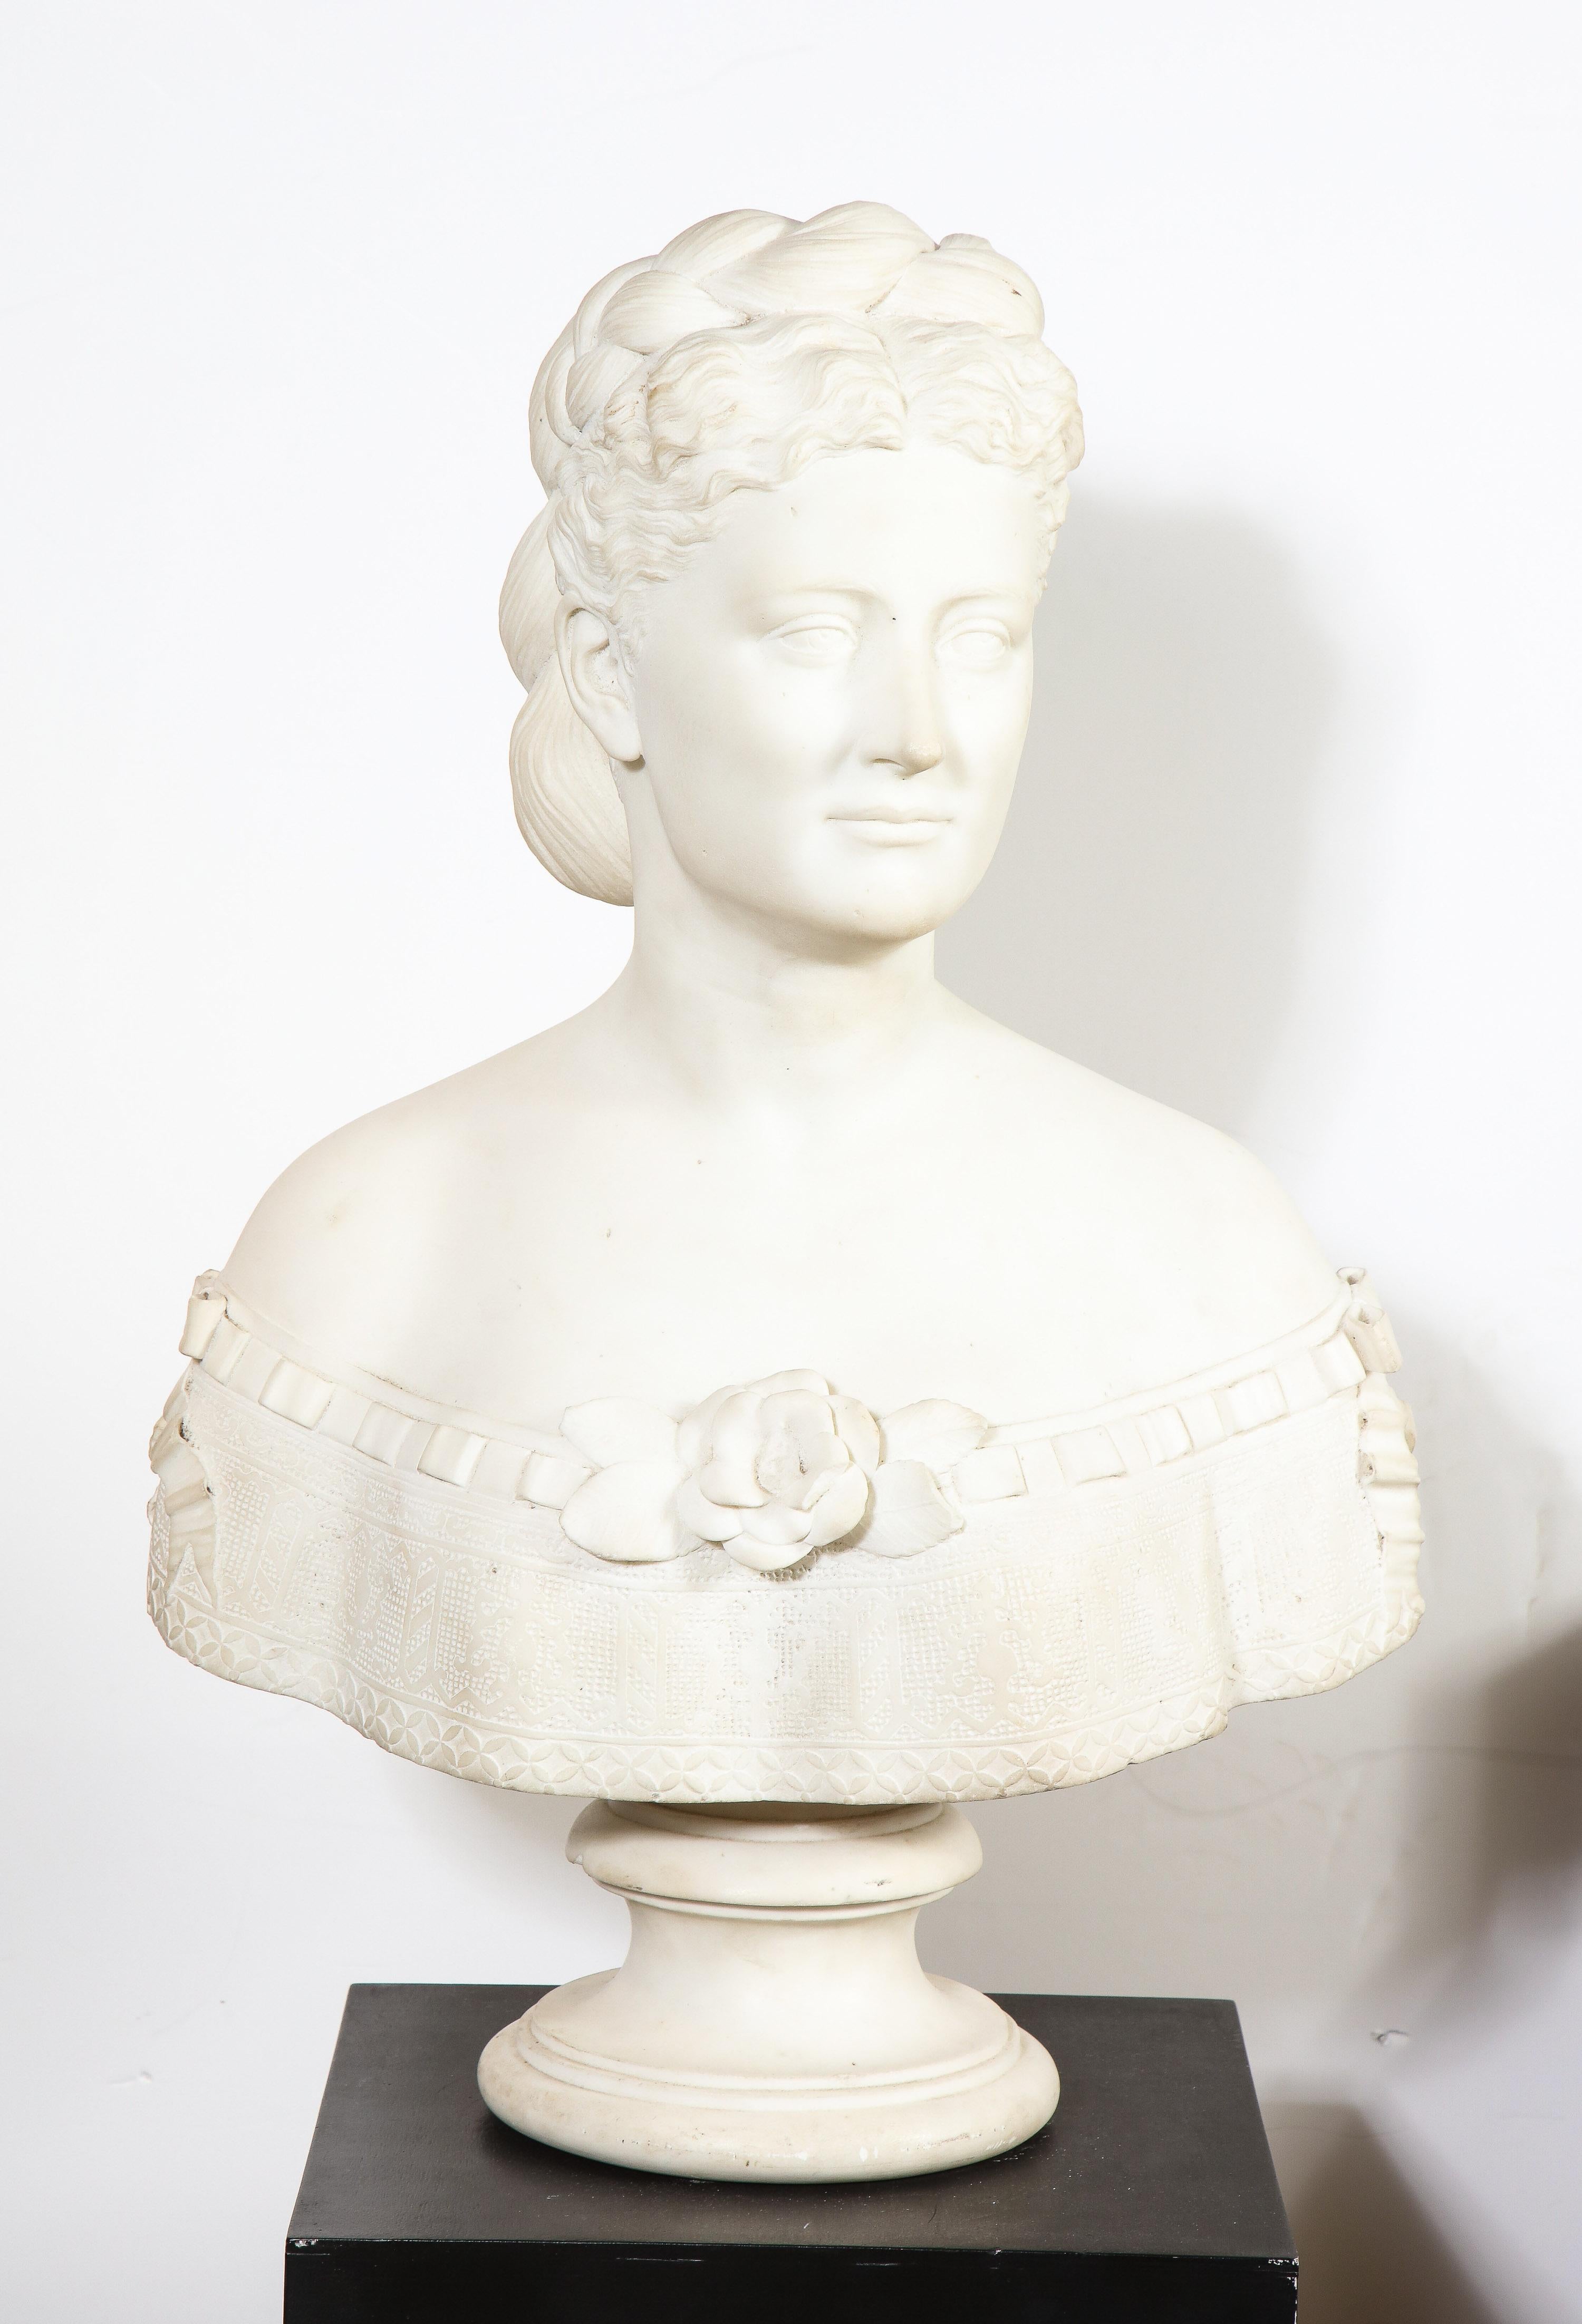 Thomas Ridgeway Gould (1818-1881) an extremely rare American White Marble Bust of A Woman, circa 1870.

Depicting a beautiful woman with her hair double row, braided in a bun. Very fine quality, a masterpiece, museum sculpture.

Signed 